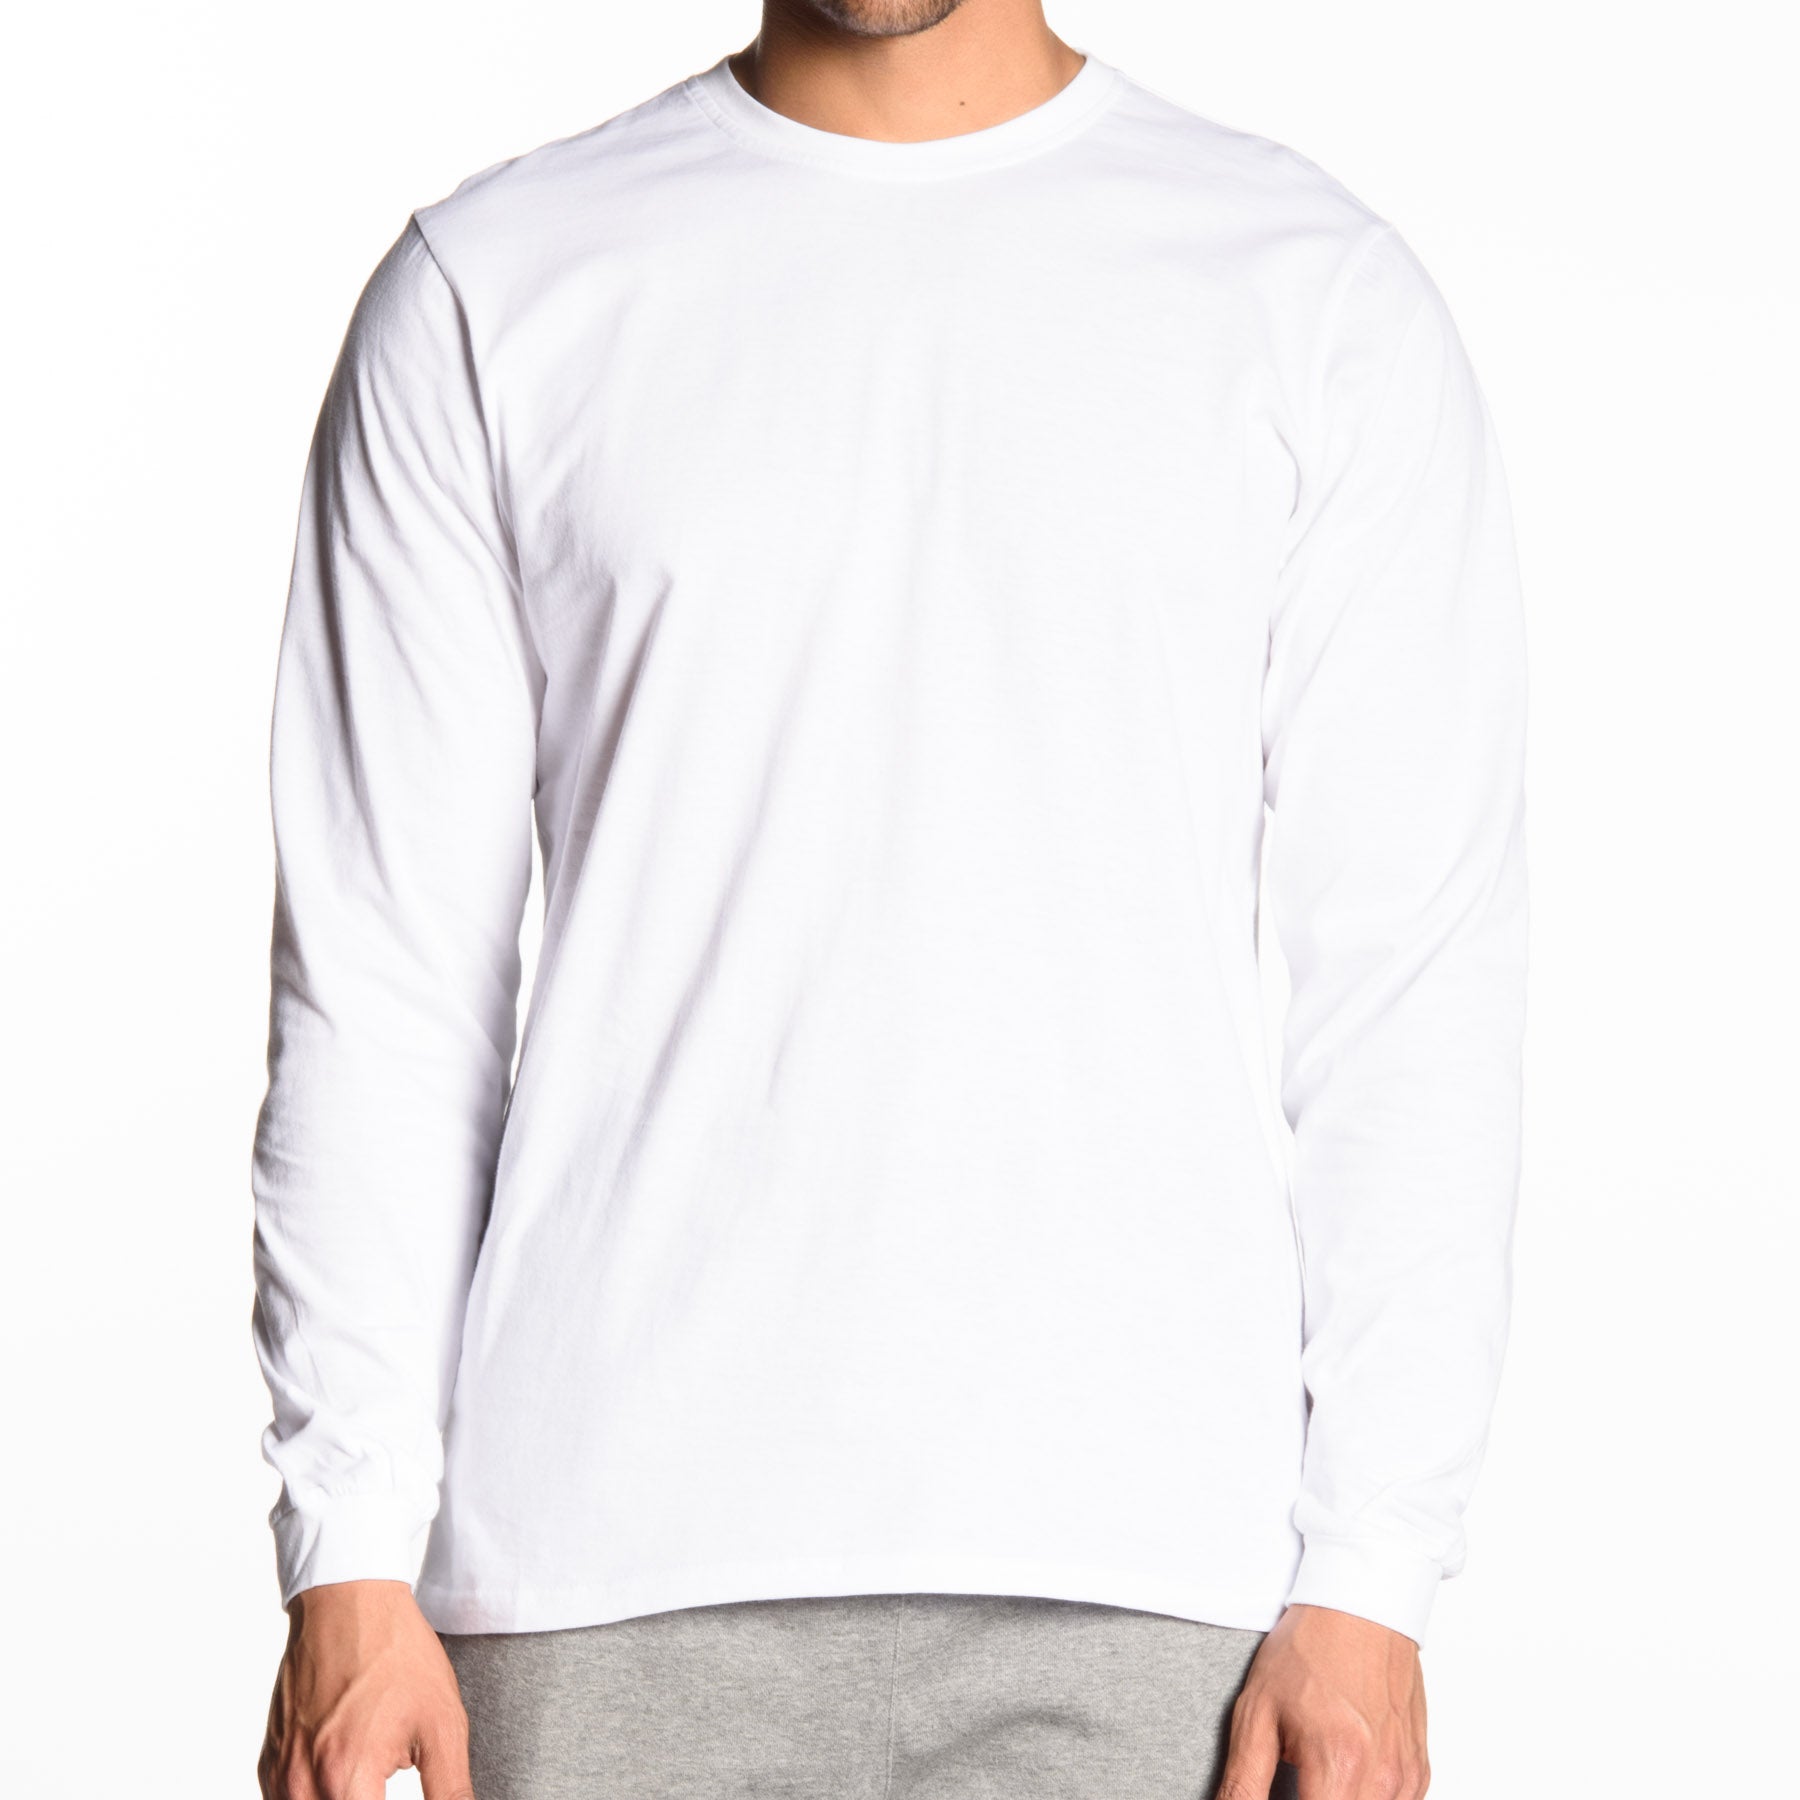 Fitted Long Sleeves